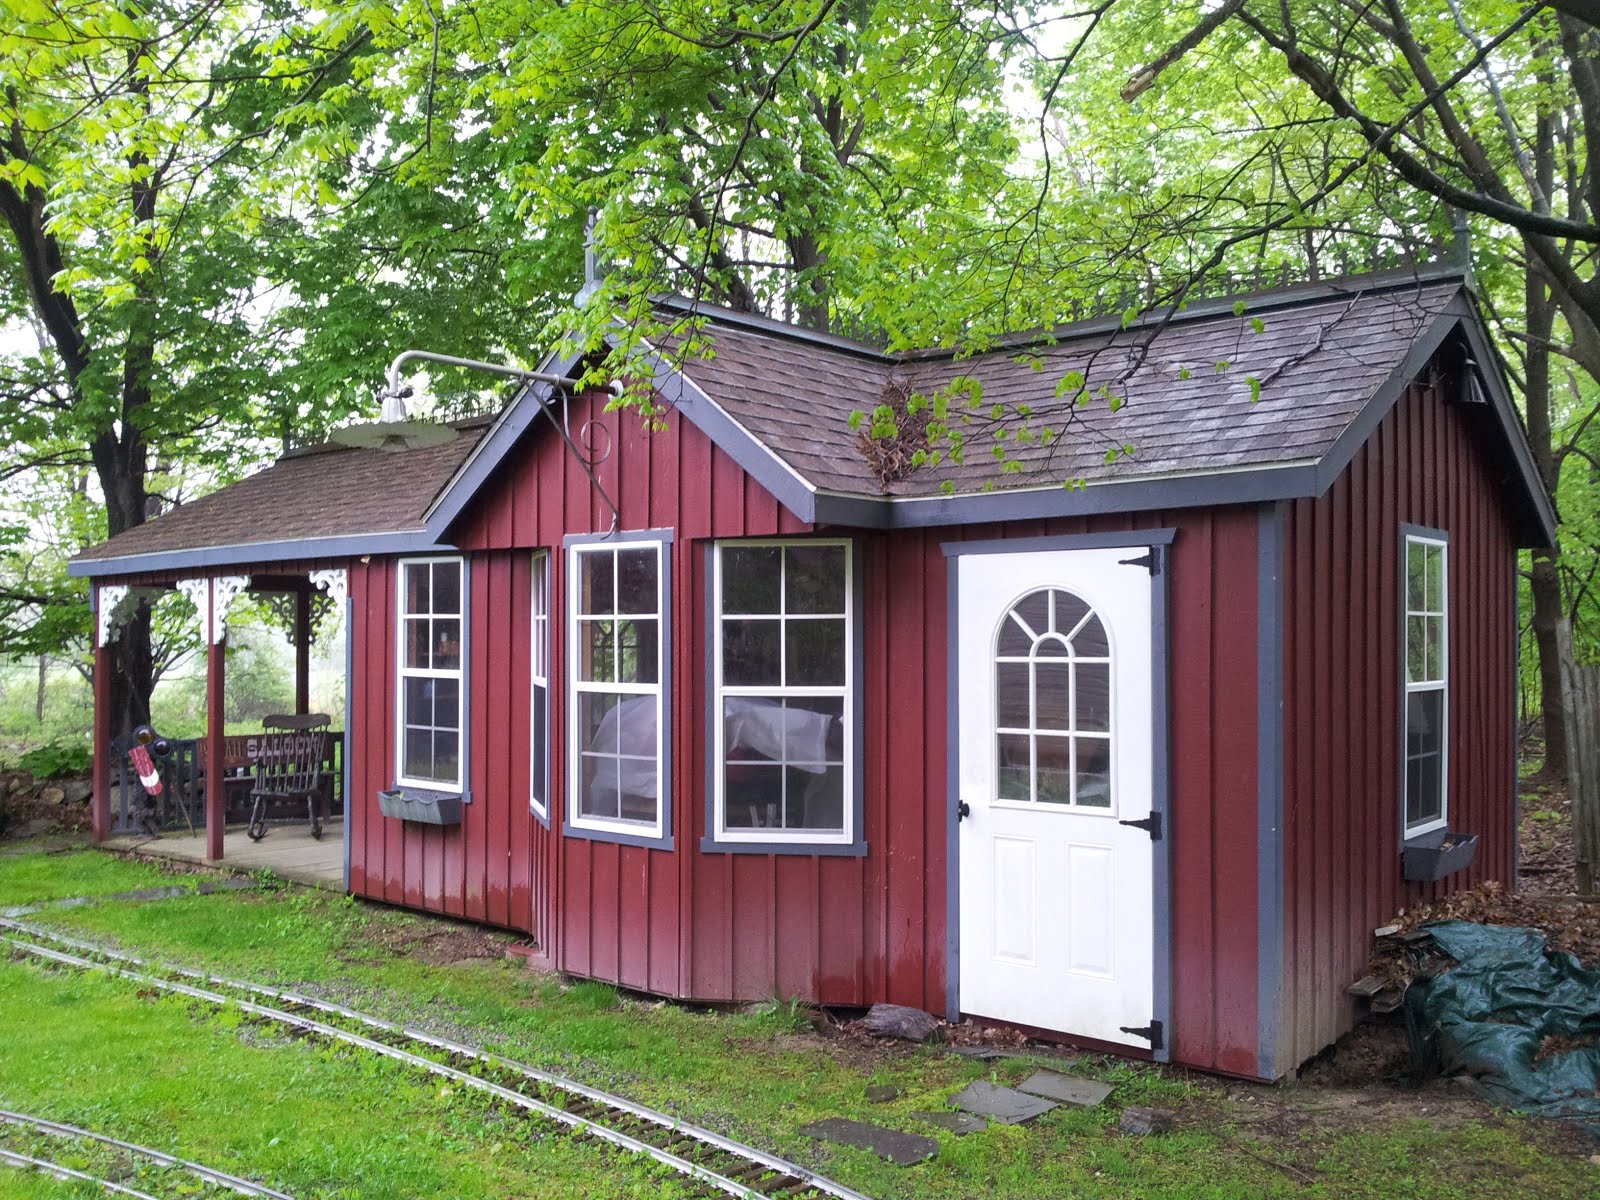 where to buy amish built sheds near me and how can i tell